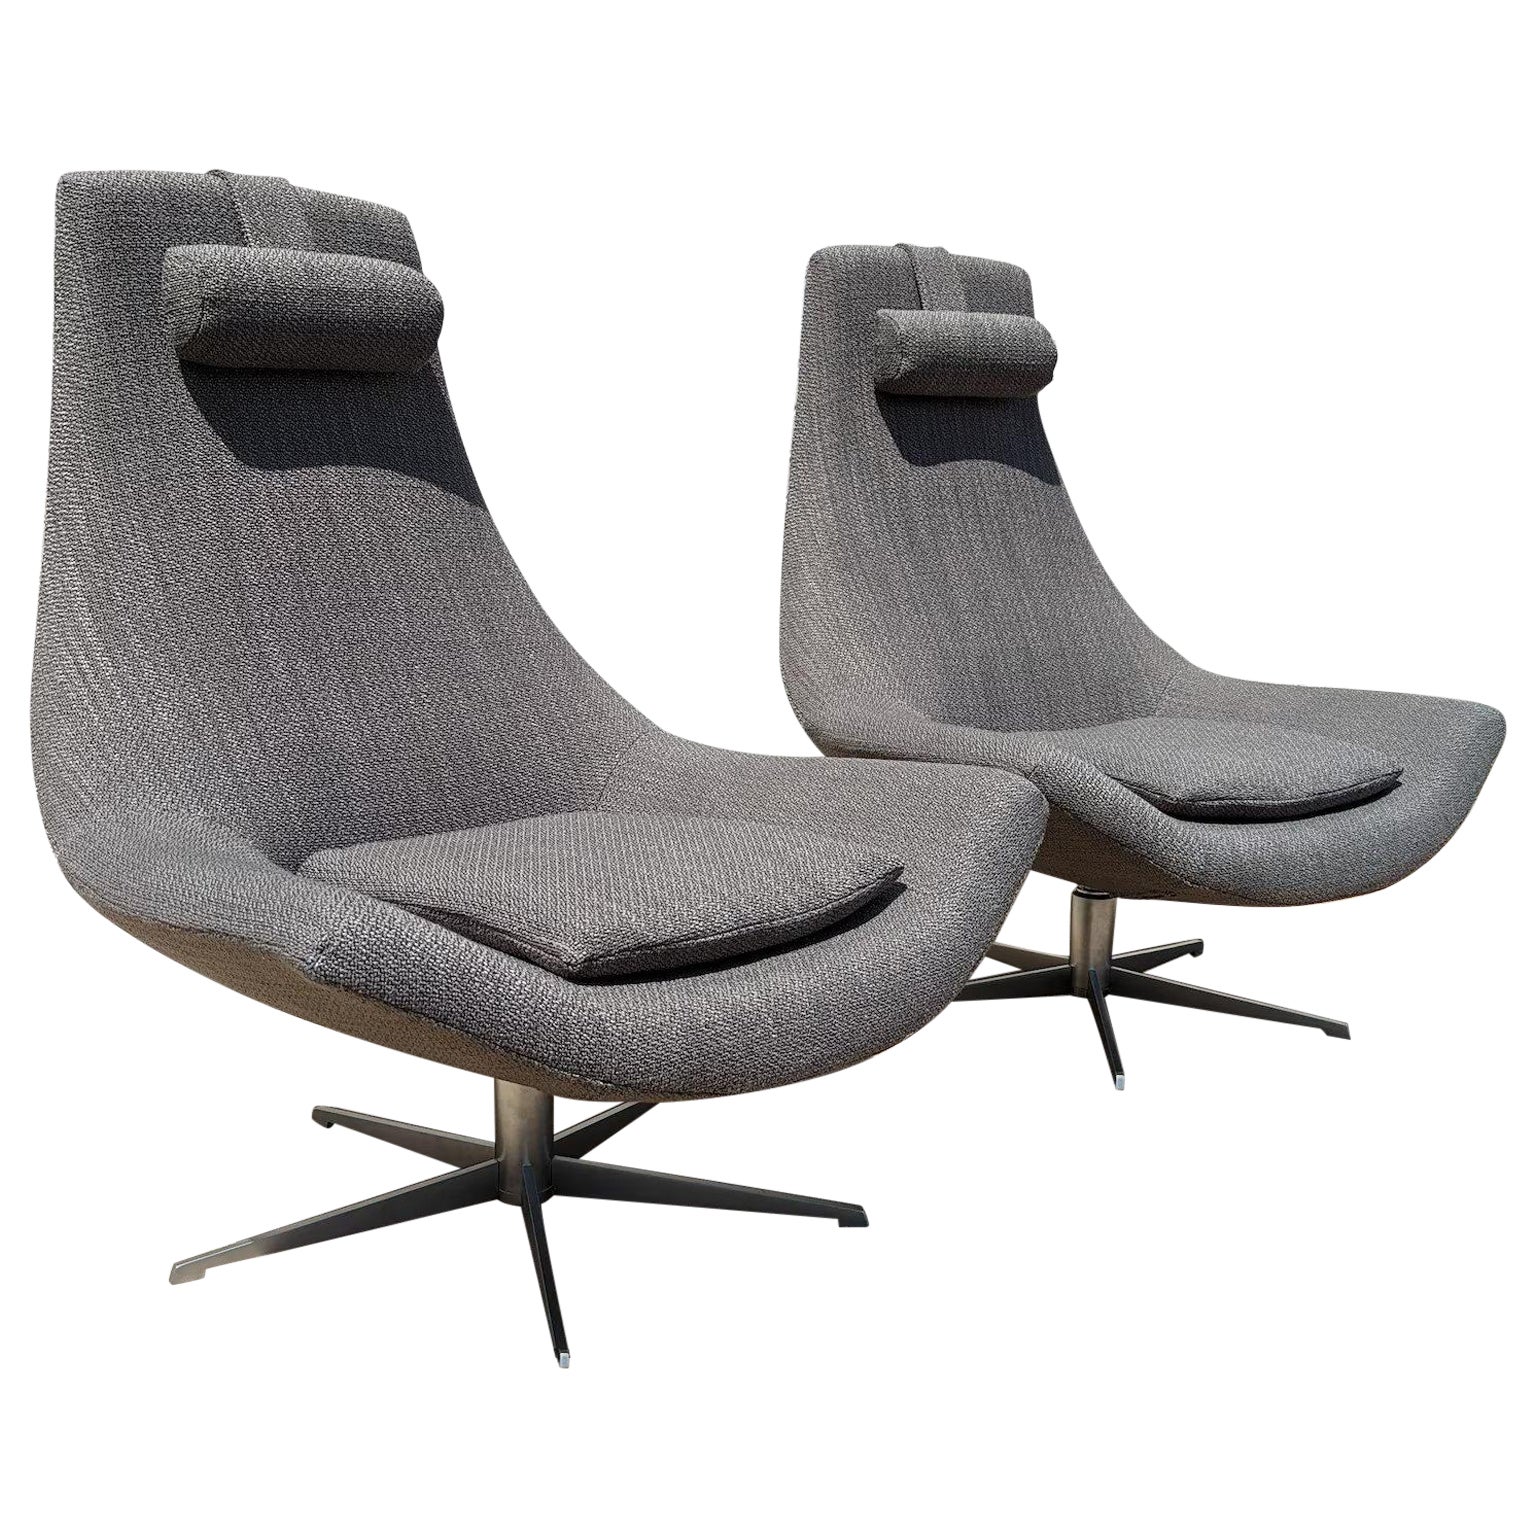 Pair of Mid Century Modern Italian Inspired High Back Swivel Chairs For Sale